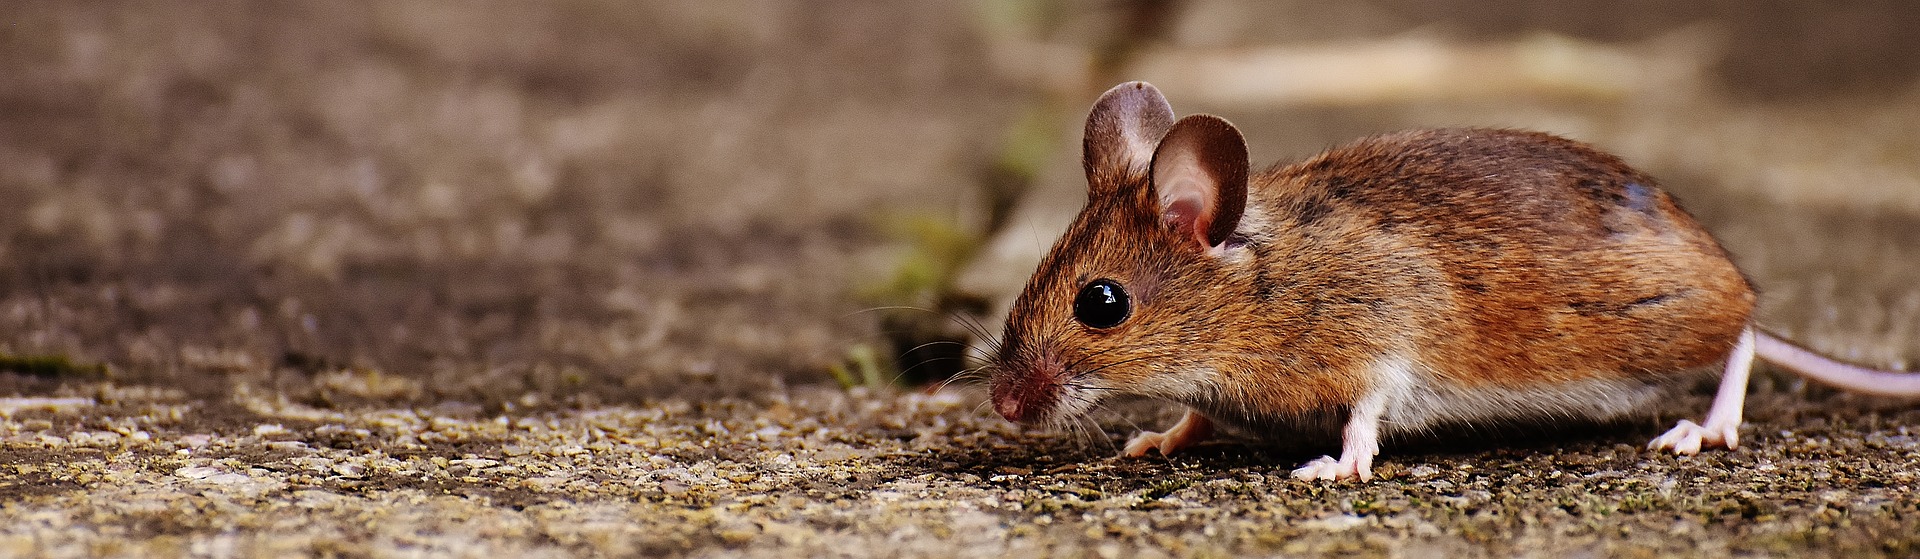 Deer Mouse: A mouse with brown fur on top and white fur underneath. Its  ears are large relative its head size.